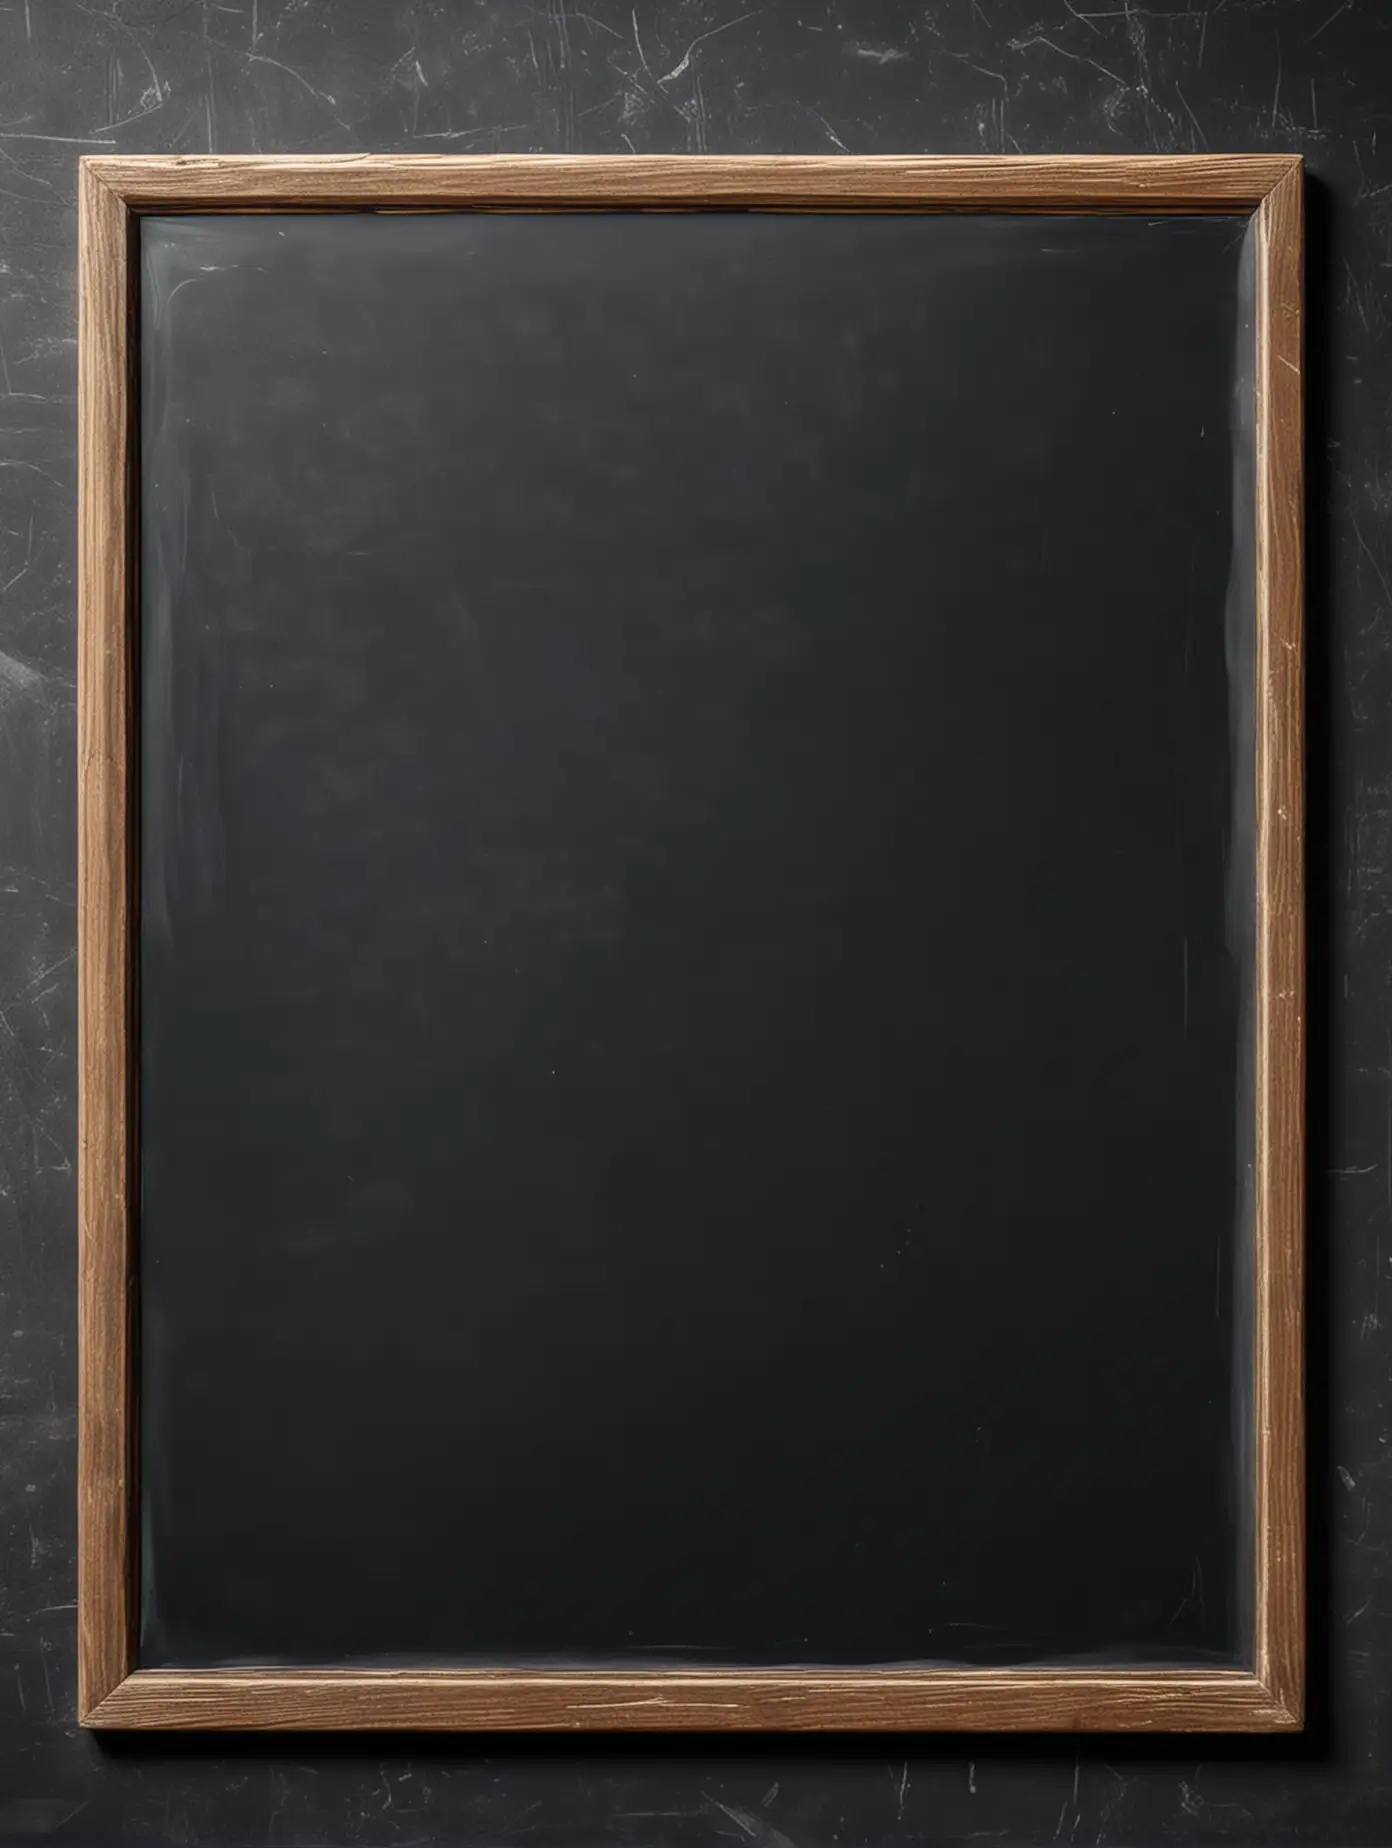 Chalkboard with Blank Space for Drawing or Writing